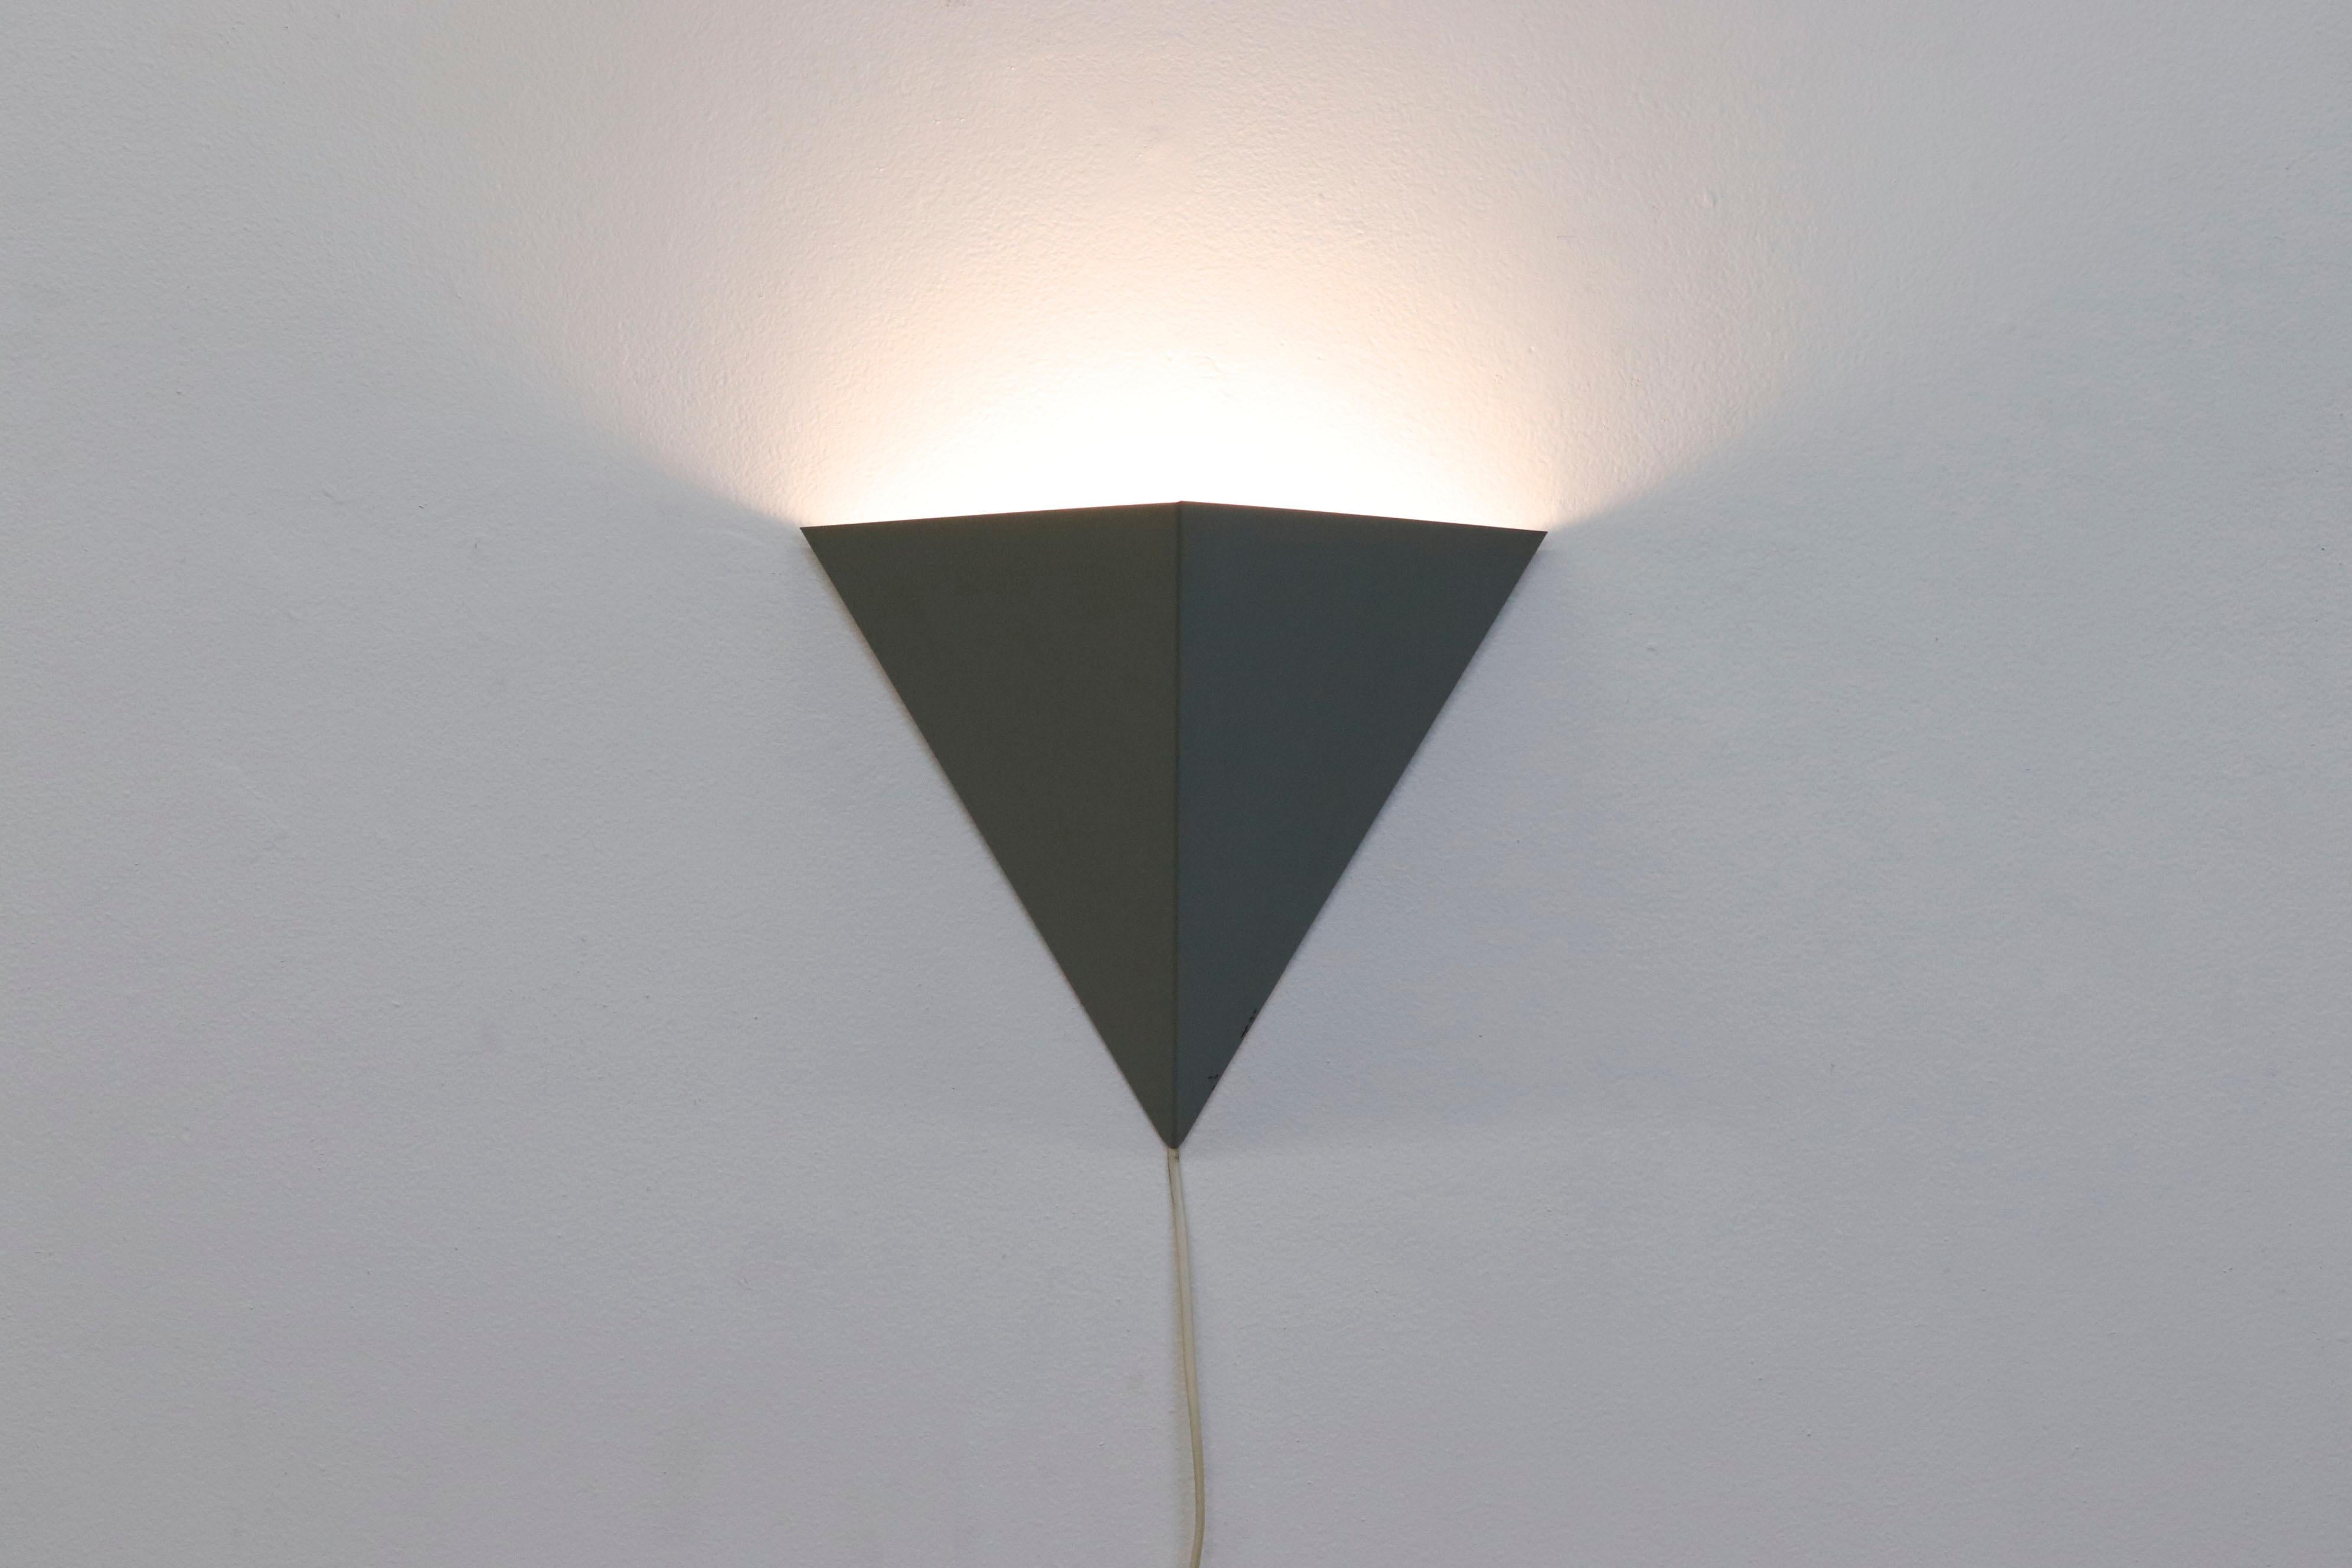 Rare Anvia triangular wall sconce with sleek gray enameled aluminum shade in original condition with wear and scratching consistent with age and use.